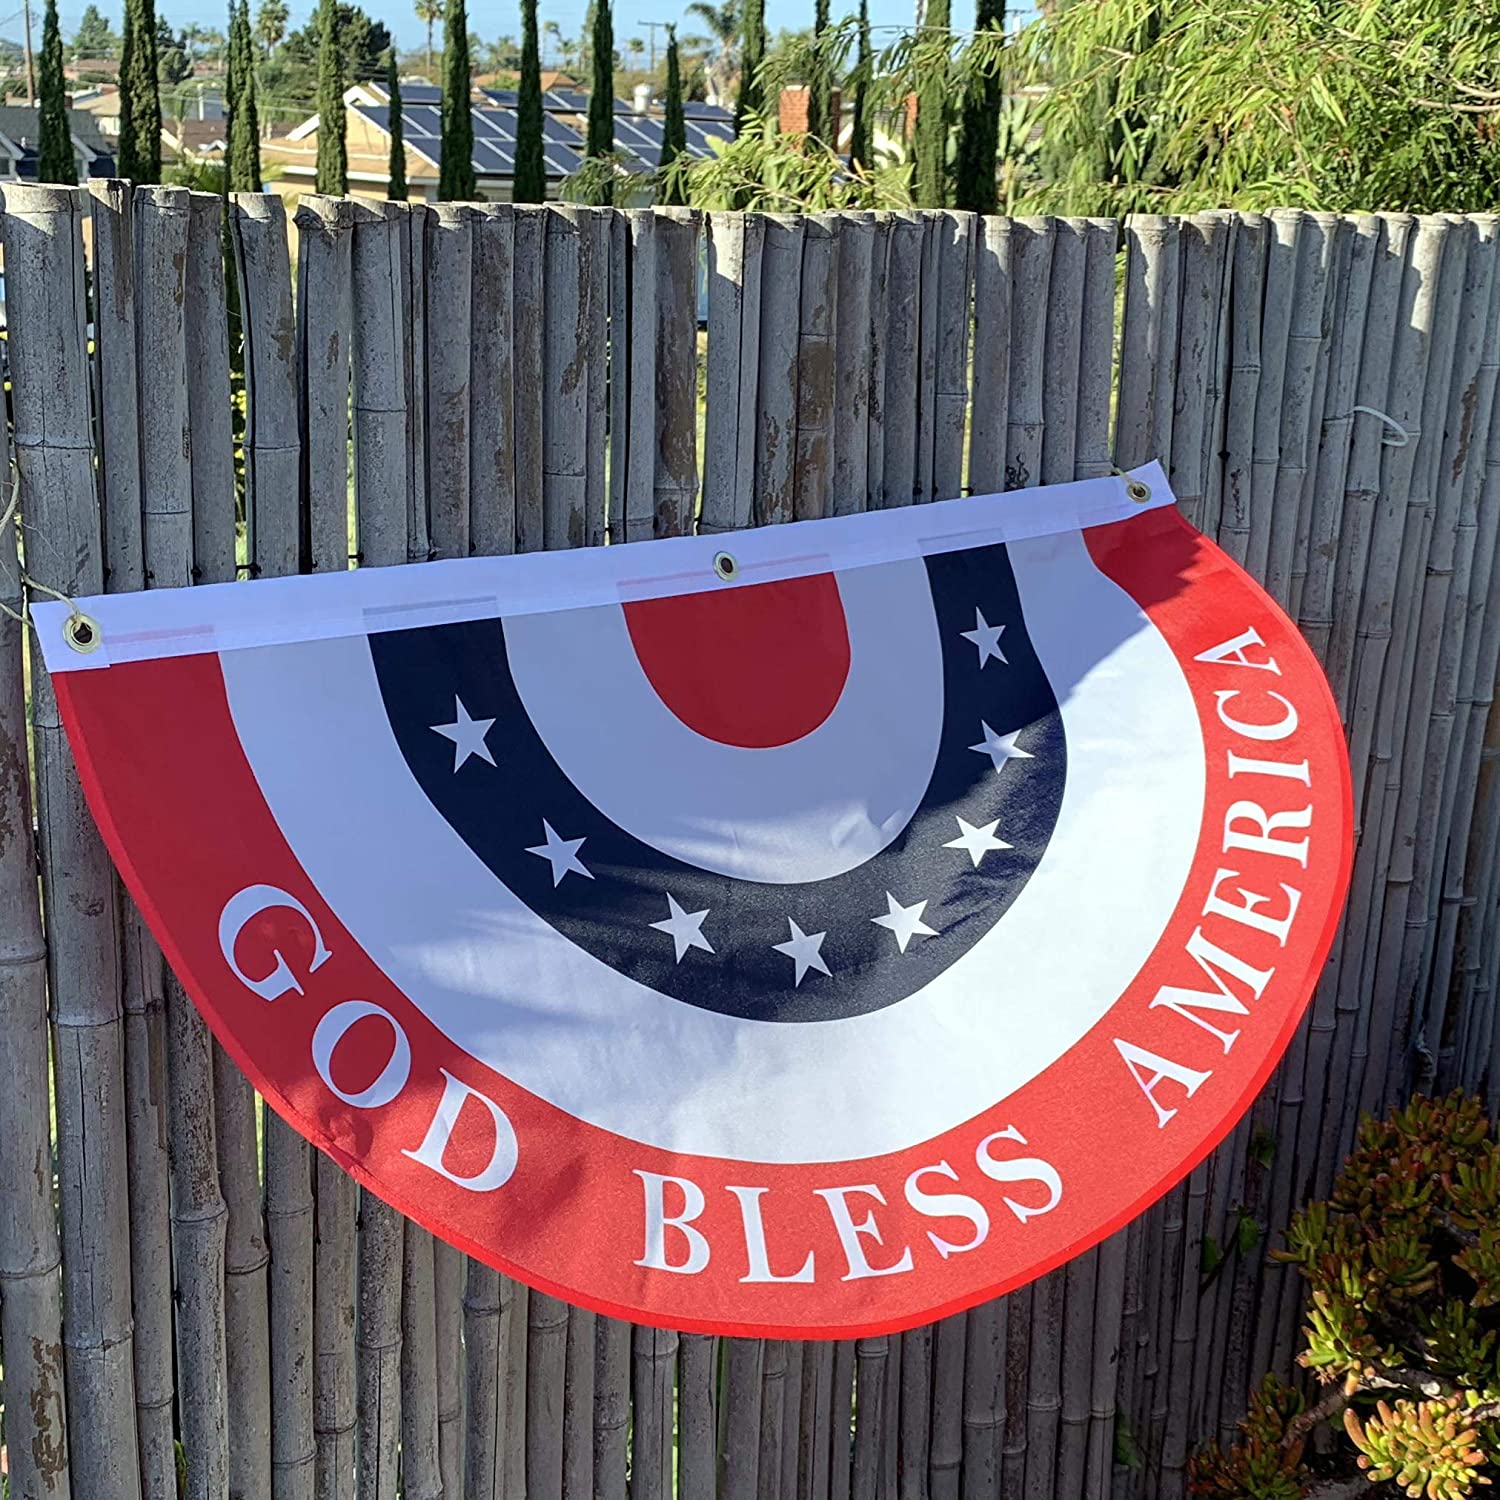 God Bless America Bunting Flag – 18” x 36”, USA, President's Day, Memorial Day, 4th of July, Patriotic Decoration, Christmas - image 3 of 6